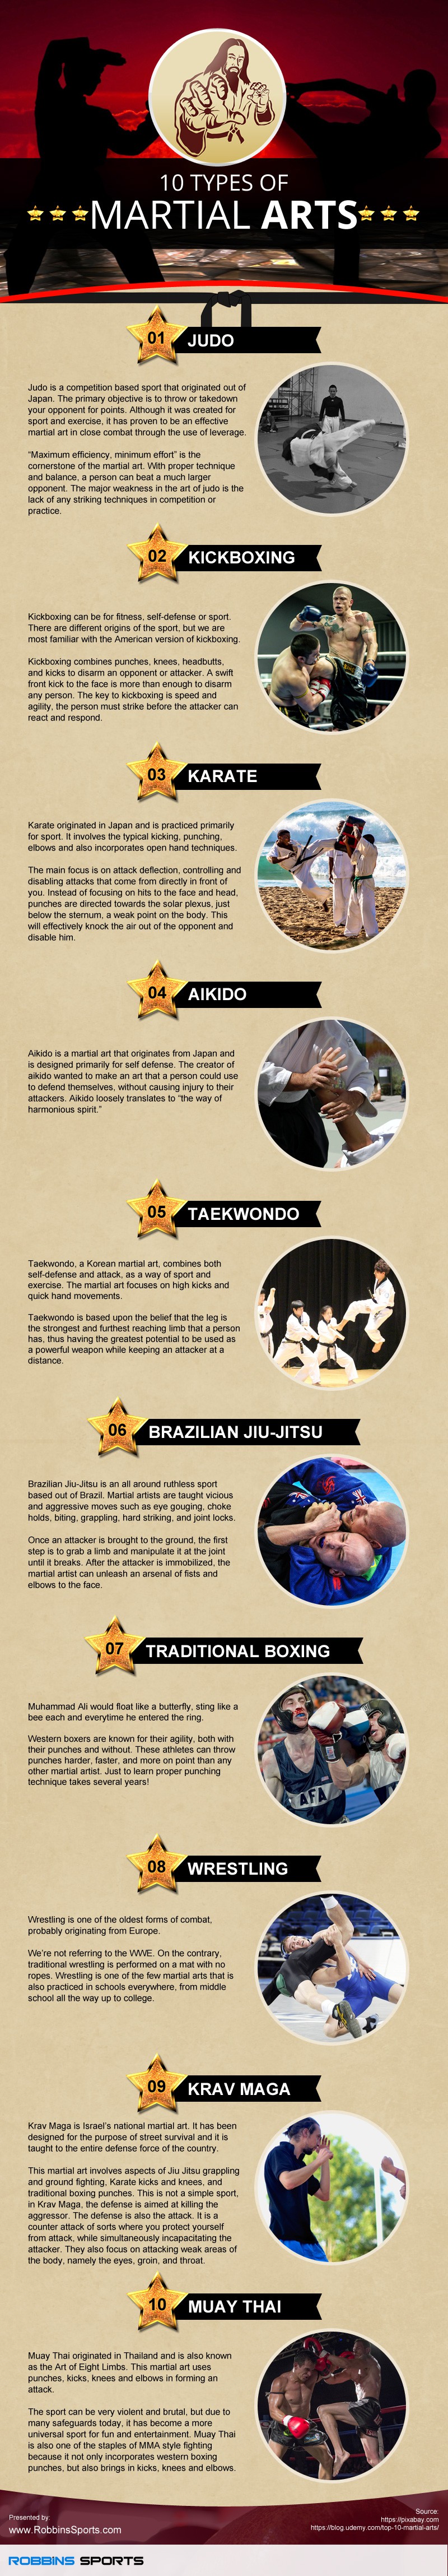 10 Kinds Of Martial Arts - Infographic